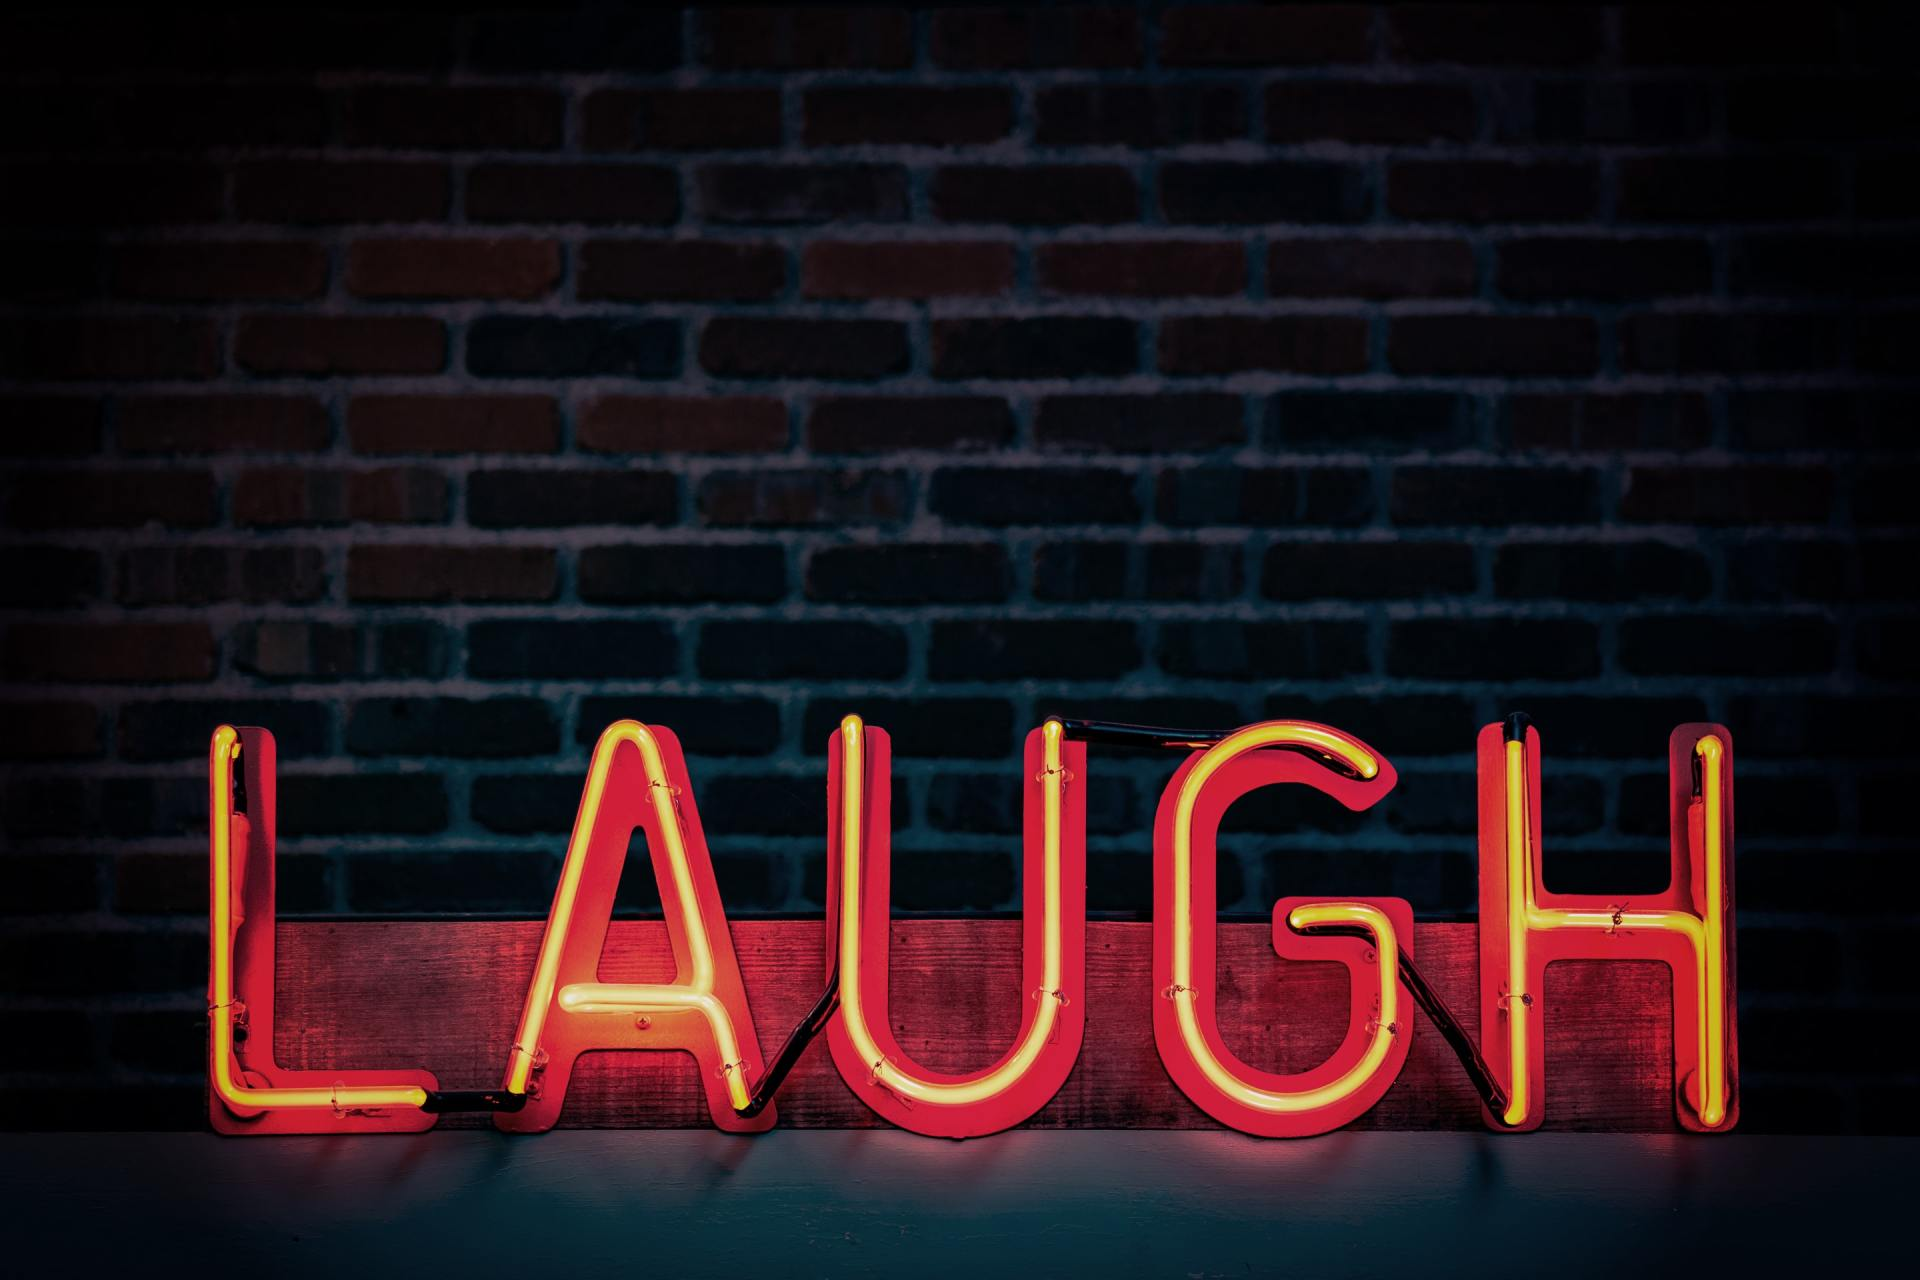 Neon sign LAUGH reminds us it is okay to laugh daily even about death!bout death.